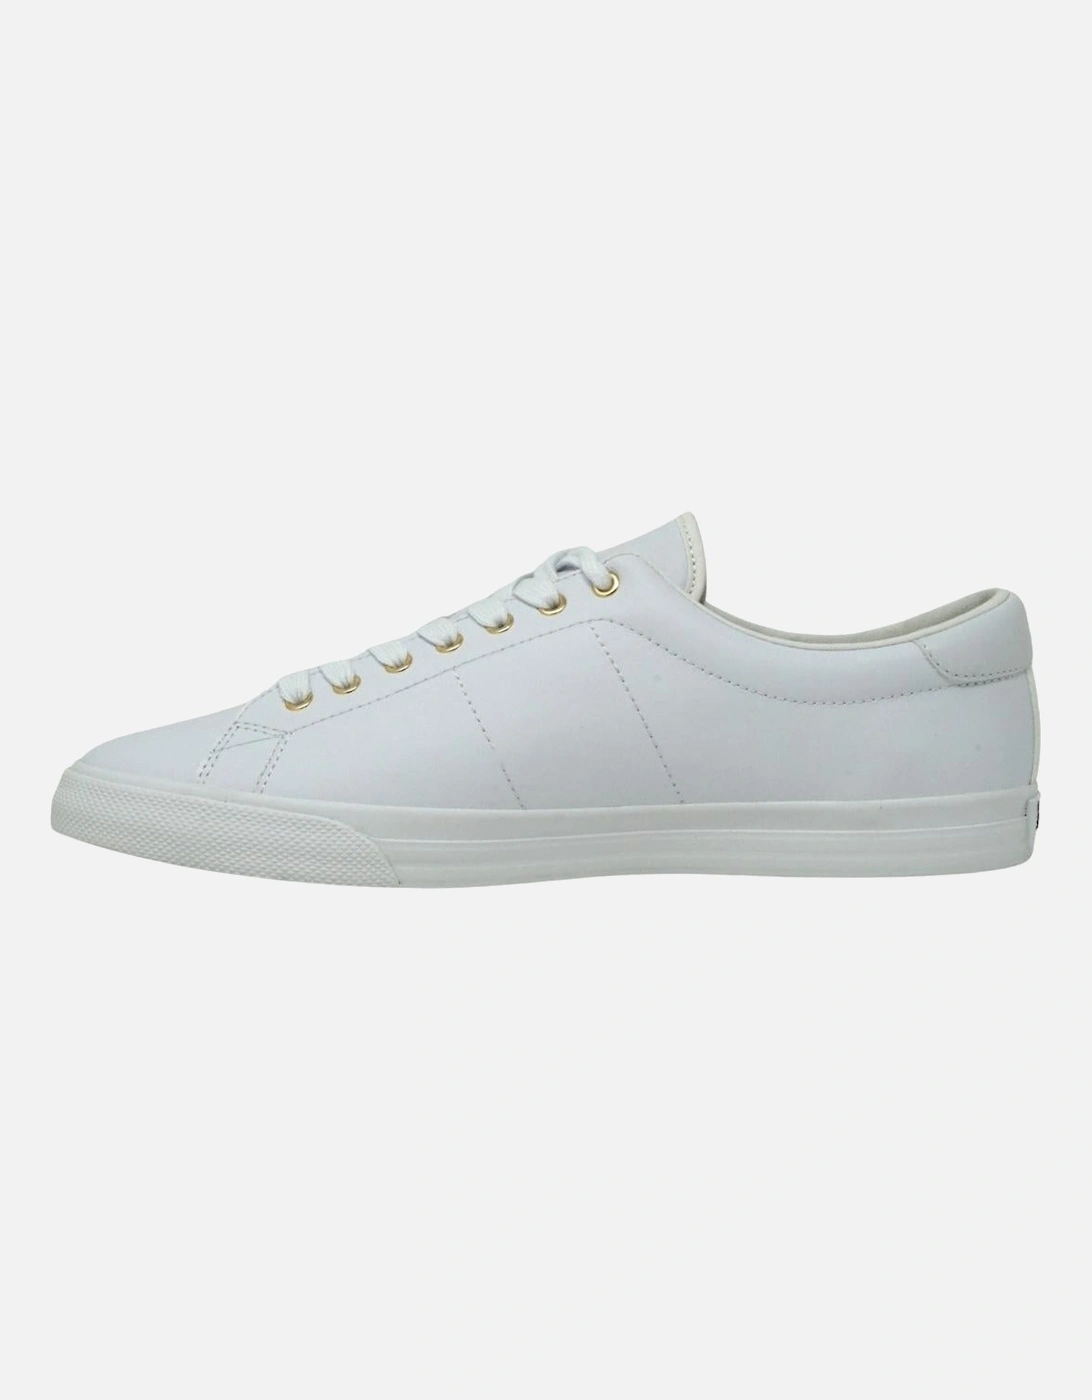 Spencer Leather B8288 100 White Trainers